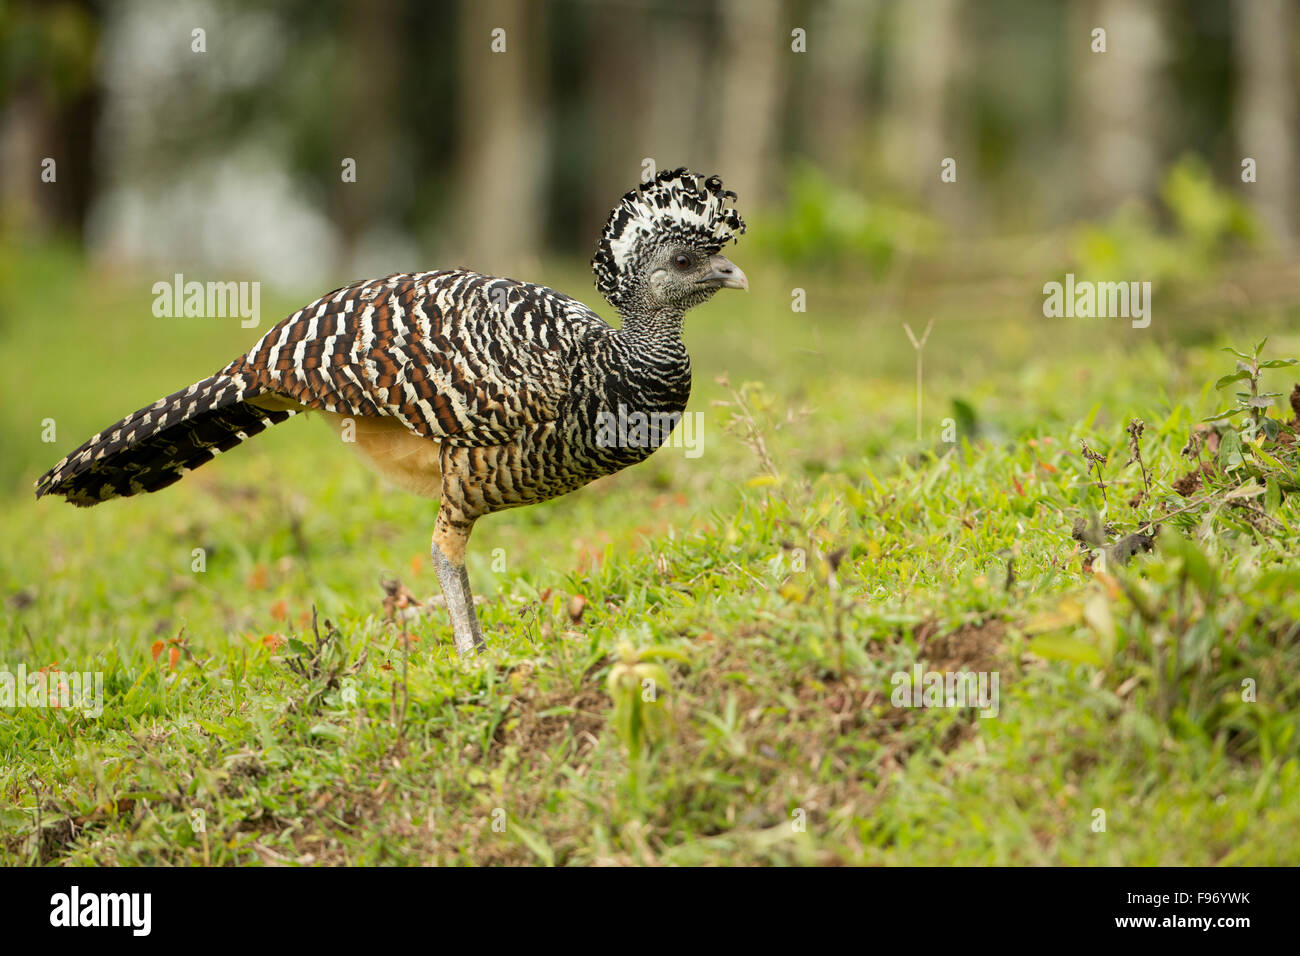 Great Curassow (Crax rubra) walking in the dry forest of Costa Rica, Central America. Stock Photo